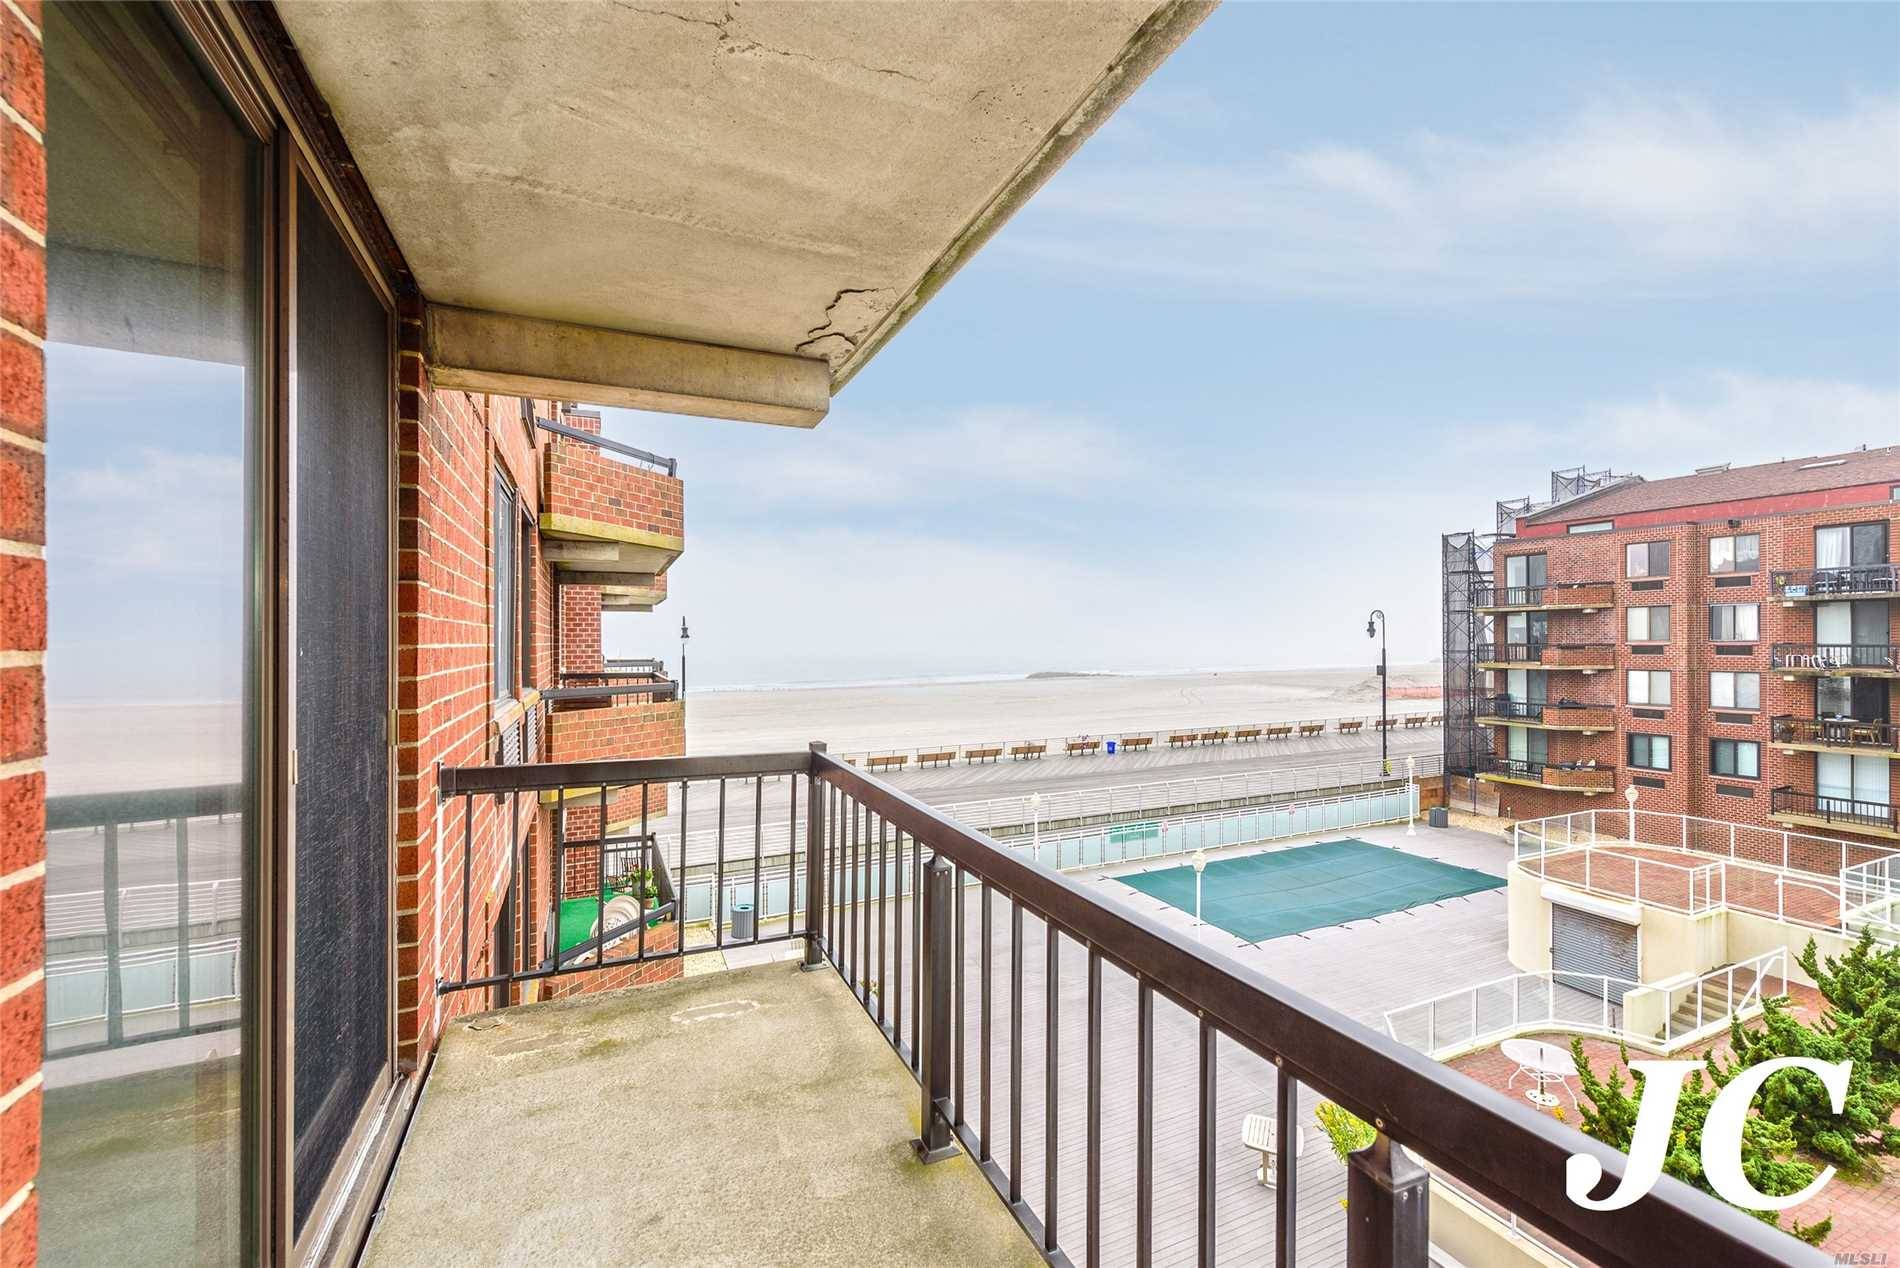 Lovely One Bed, One Bath Apartment In Luxurious Oceanfront Building W Magnificent View Of The Atlantic Ocean From Your Very Own Private Terrace.